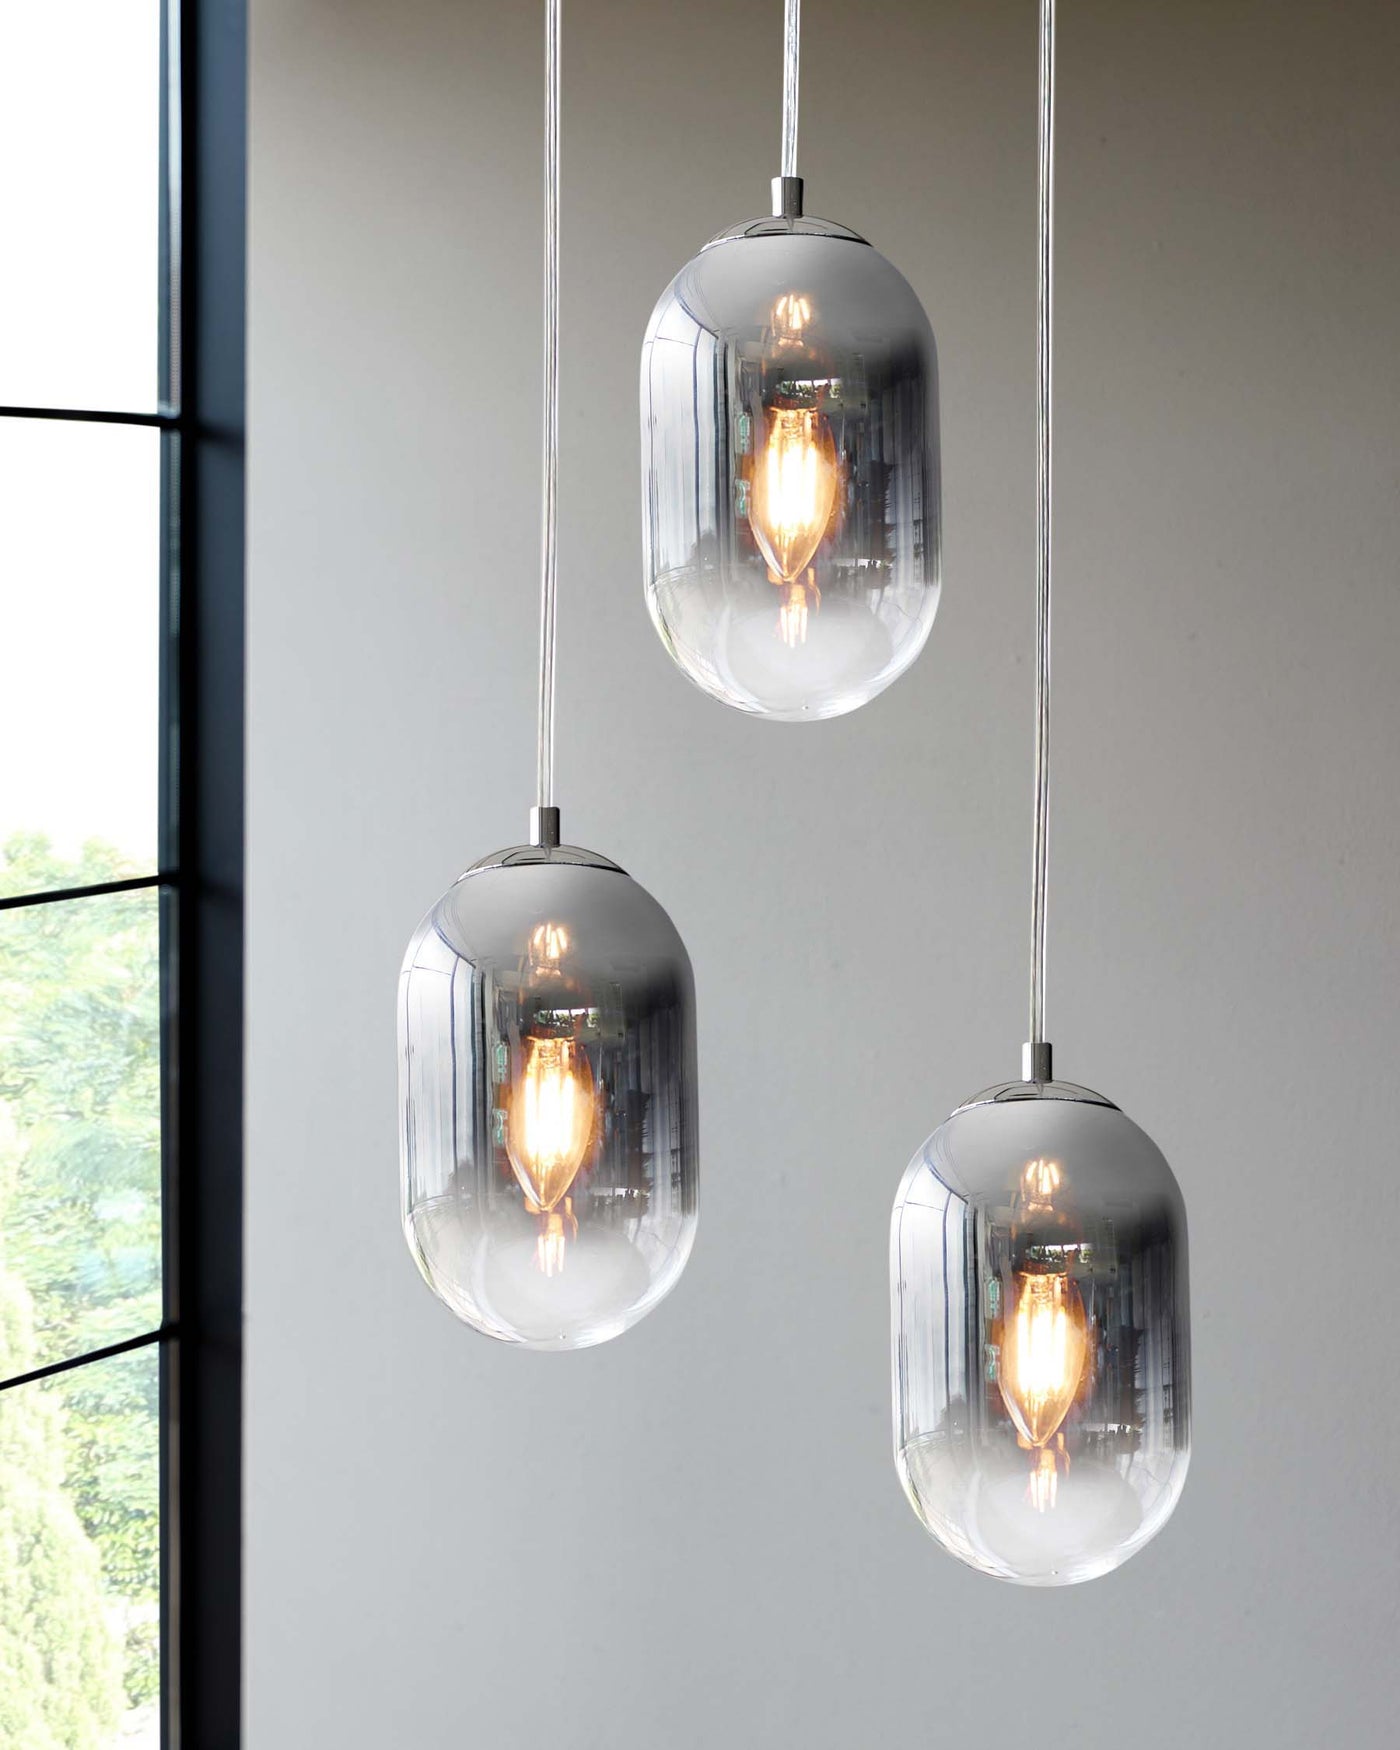 Three modern pendant lights with sleek oval-shaped, clear glass shades suspended by cords from a ceiling, each housing a luminous filament bulb.